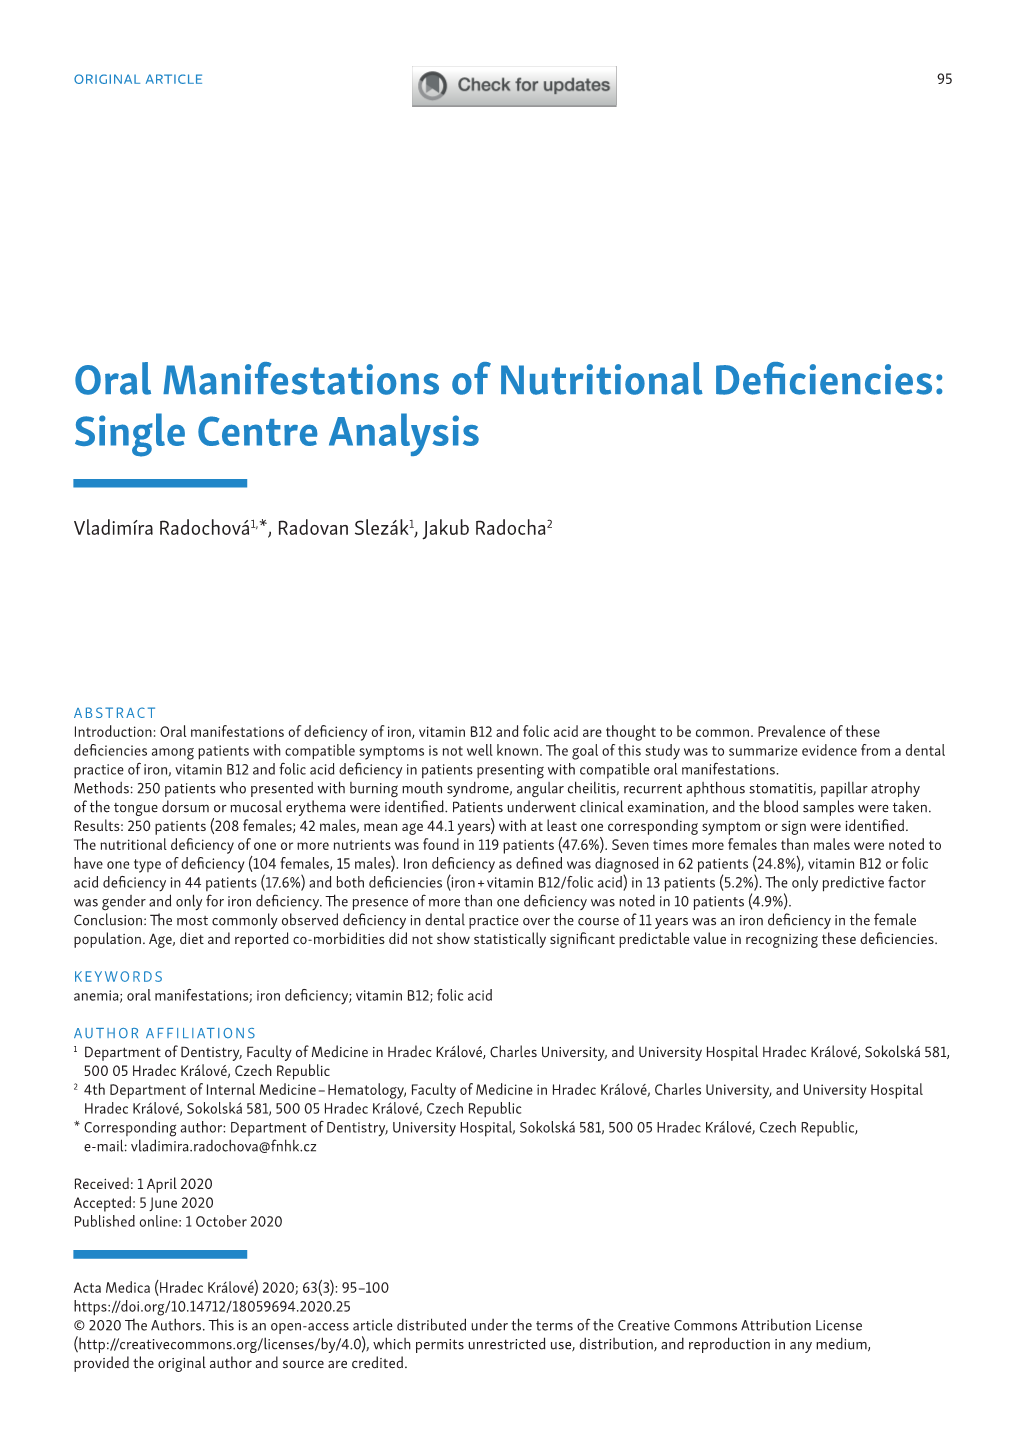 Oral Manifestations of Nutritional Deficiencies: Single Centre Analysis